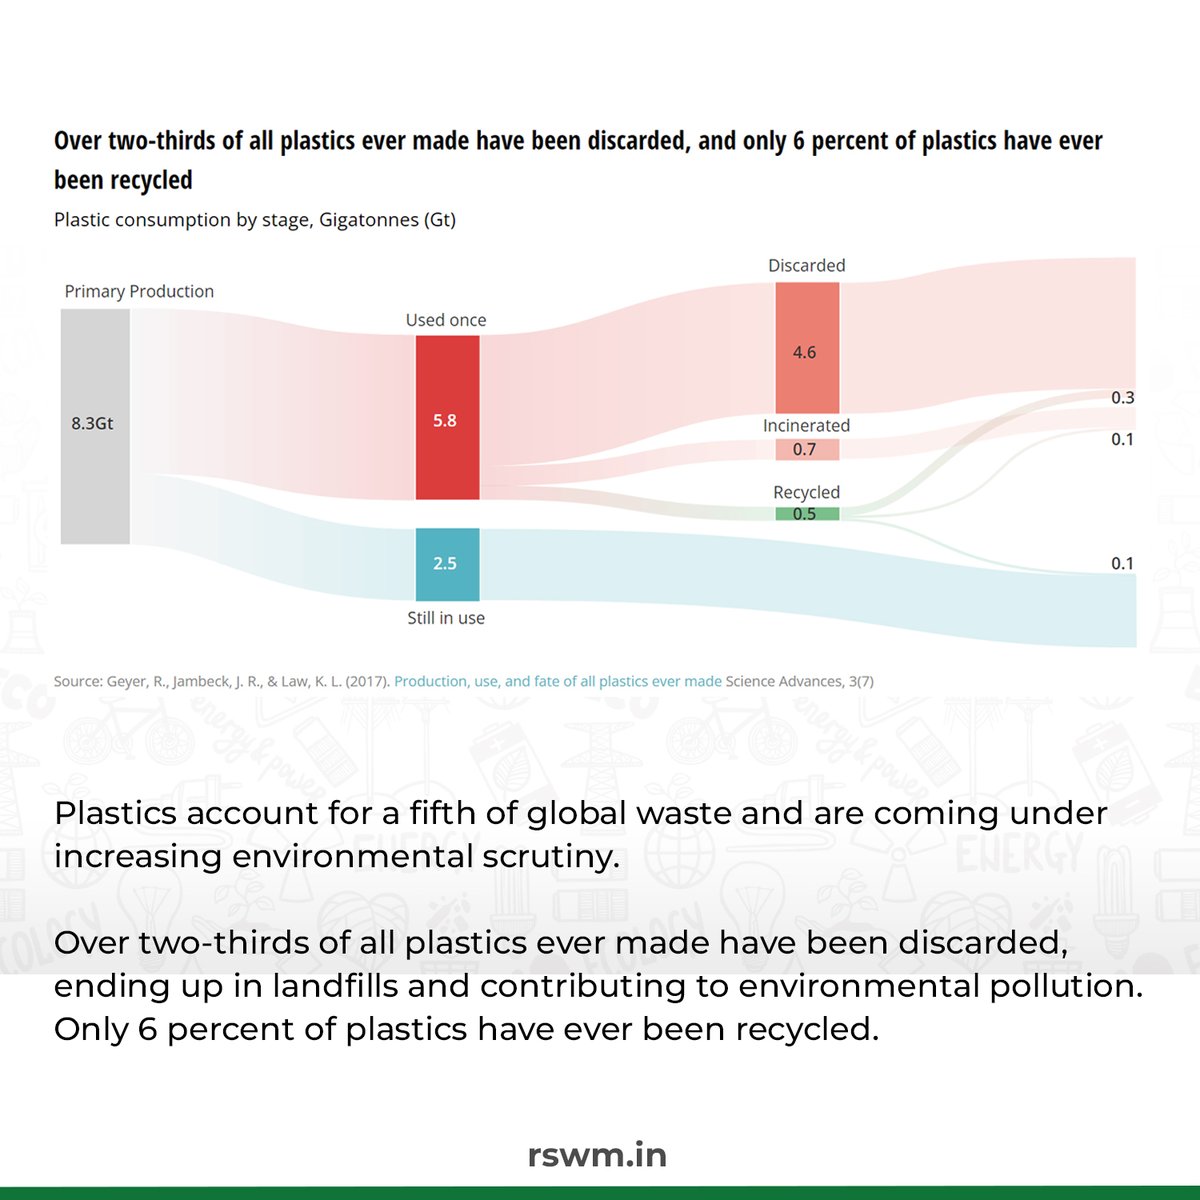 With #environment-conscious business practices at its core, RSWM Ltd #recycled 18000 MT PET #plastic bottles this quarter.

Plastics account for ~20% of #globalwaste, and only 6% of it is recycled.

#smallsteps #sustainability #sdg #goals2030 #india2030